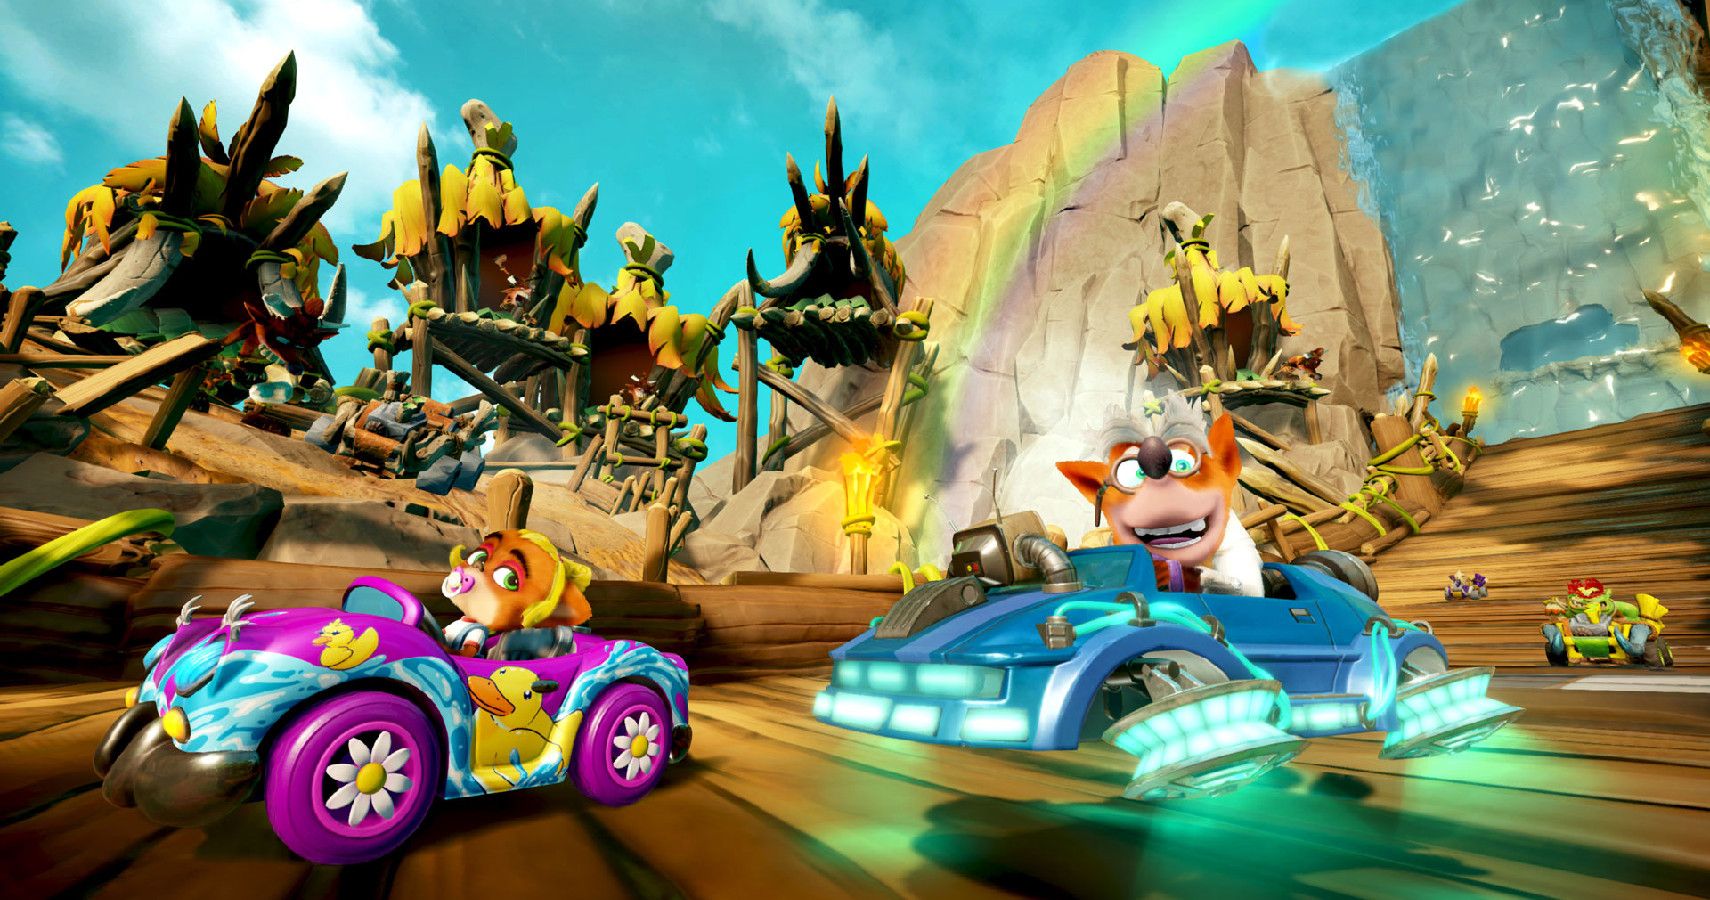 11 Tips to Earn Fast Times Wumpa Coins Crash Team Racing: Fueled